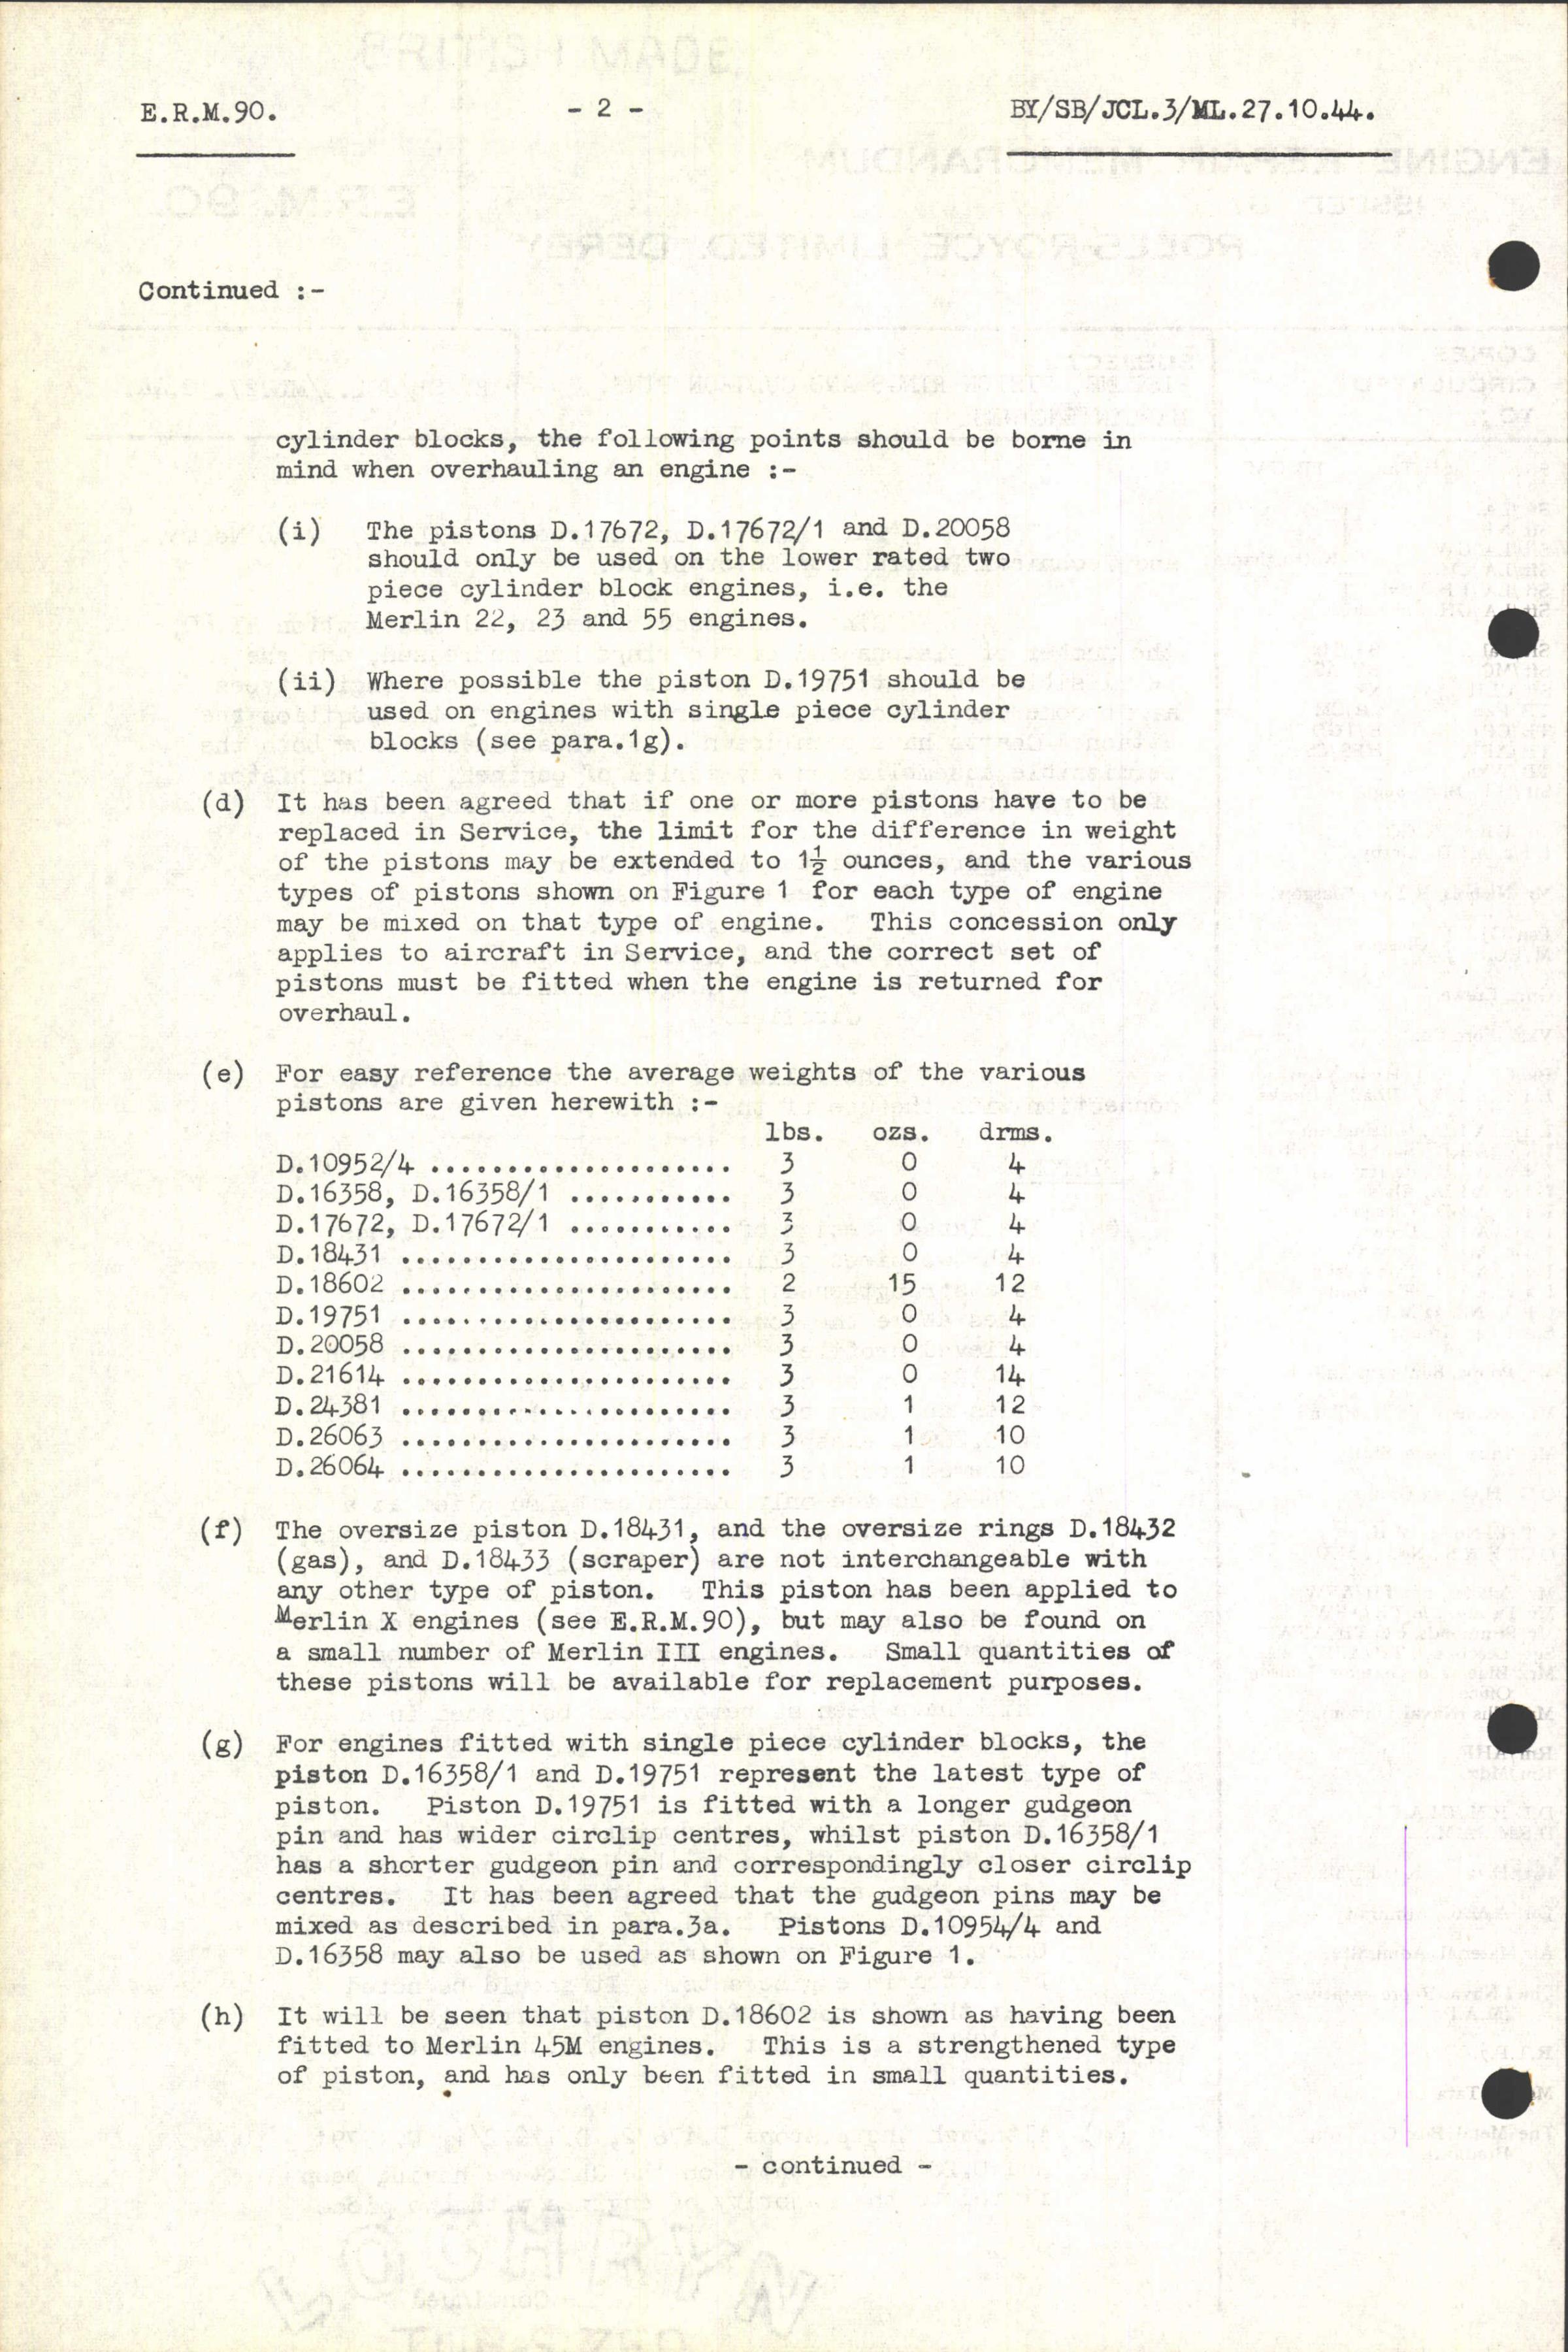 Sample page 20 from AirCorps Library document: Reconditioning and Salvage Data for Rolls-Royce Merlin Engines